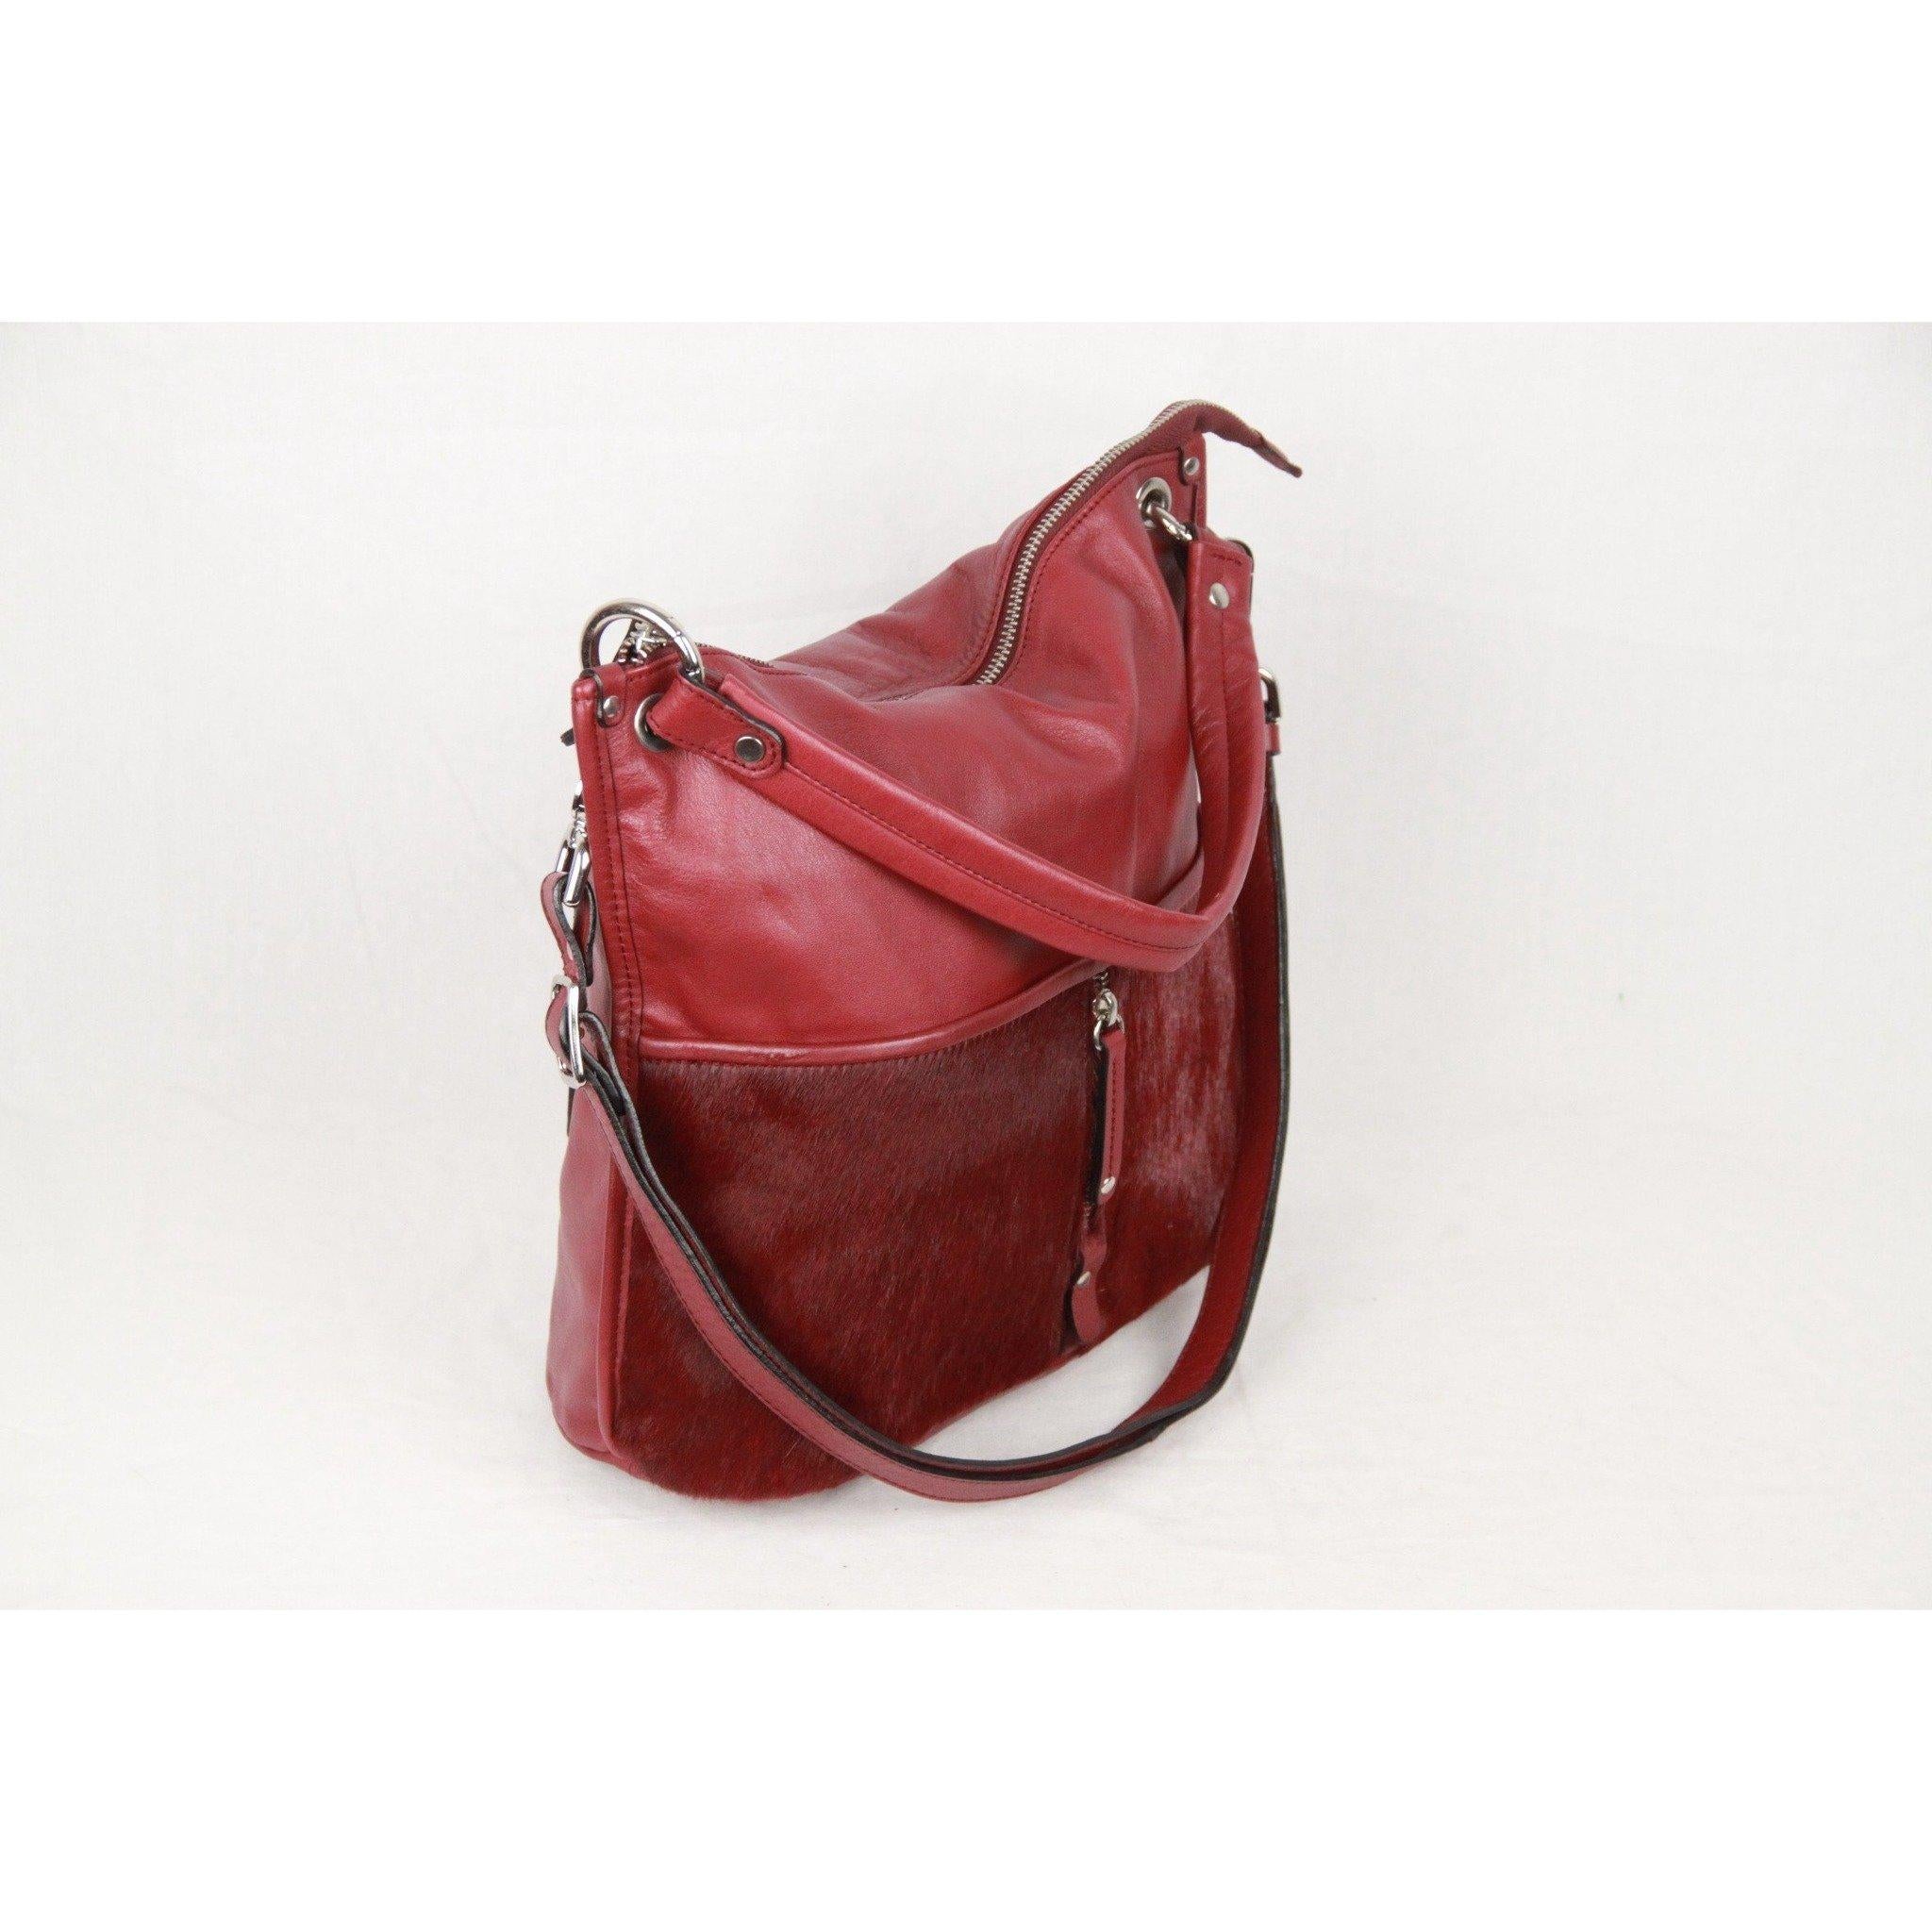 0714 'Natasha' shoulder bag from soft calf with front pony hair panel. It features two open pockets on the front. On the back, there is a zipper compartment. Inside, 1 zip pocket, 2 open pocktets, 1 pen holder and a string with carabiner.